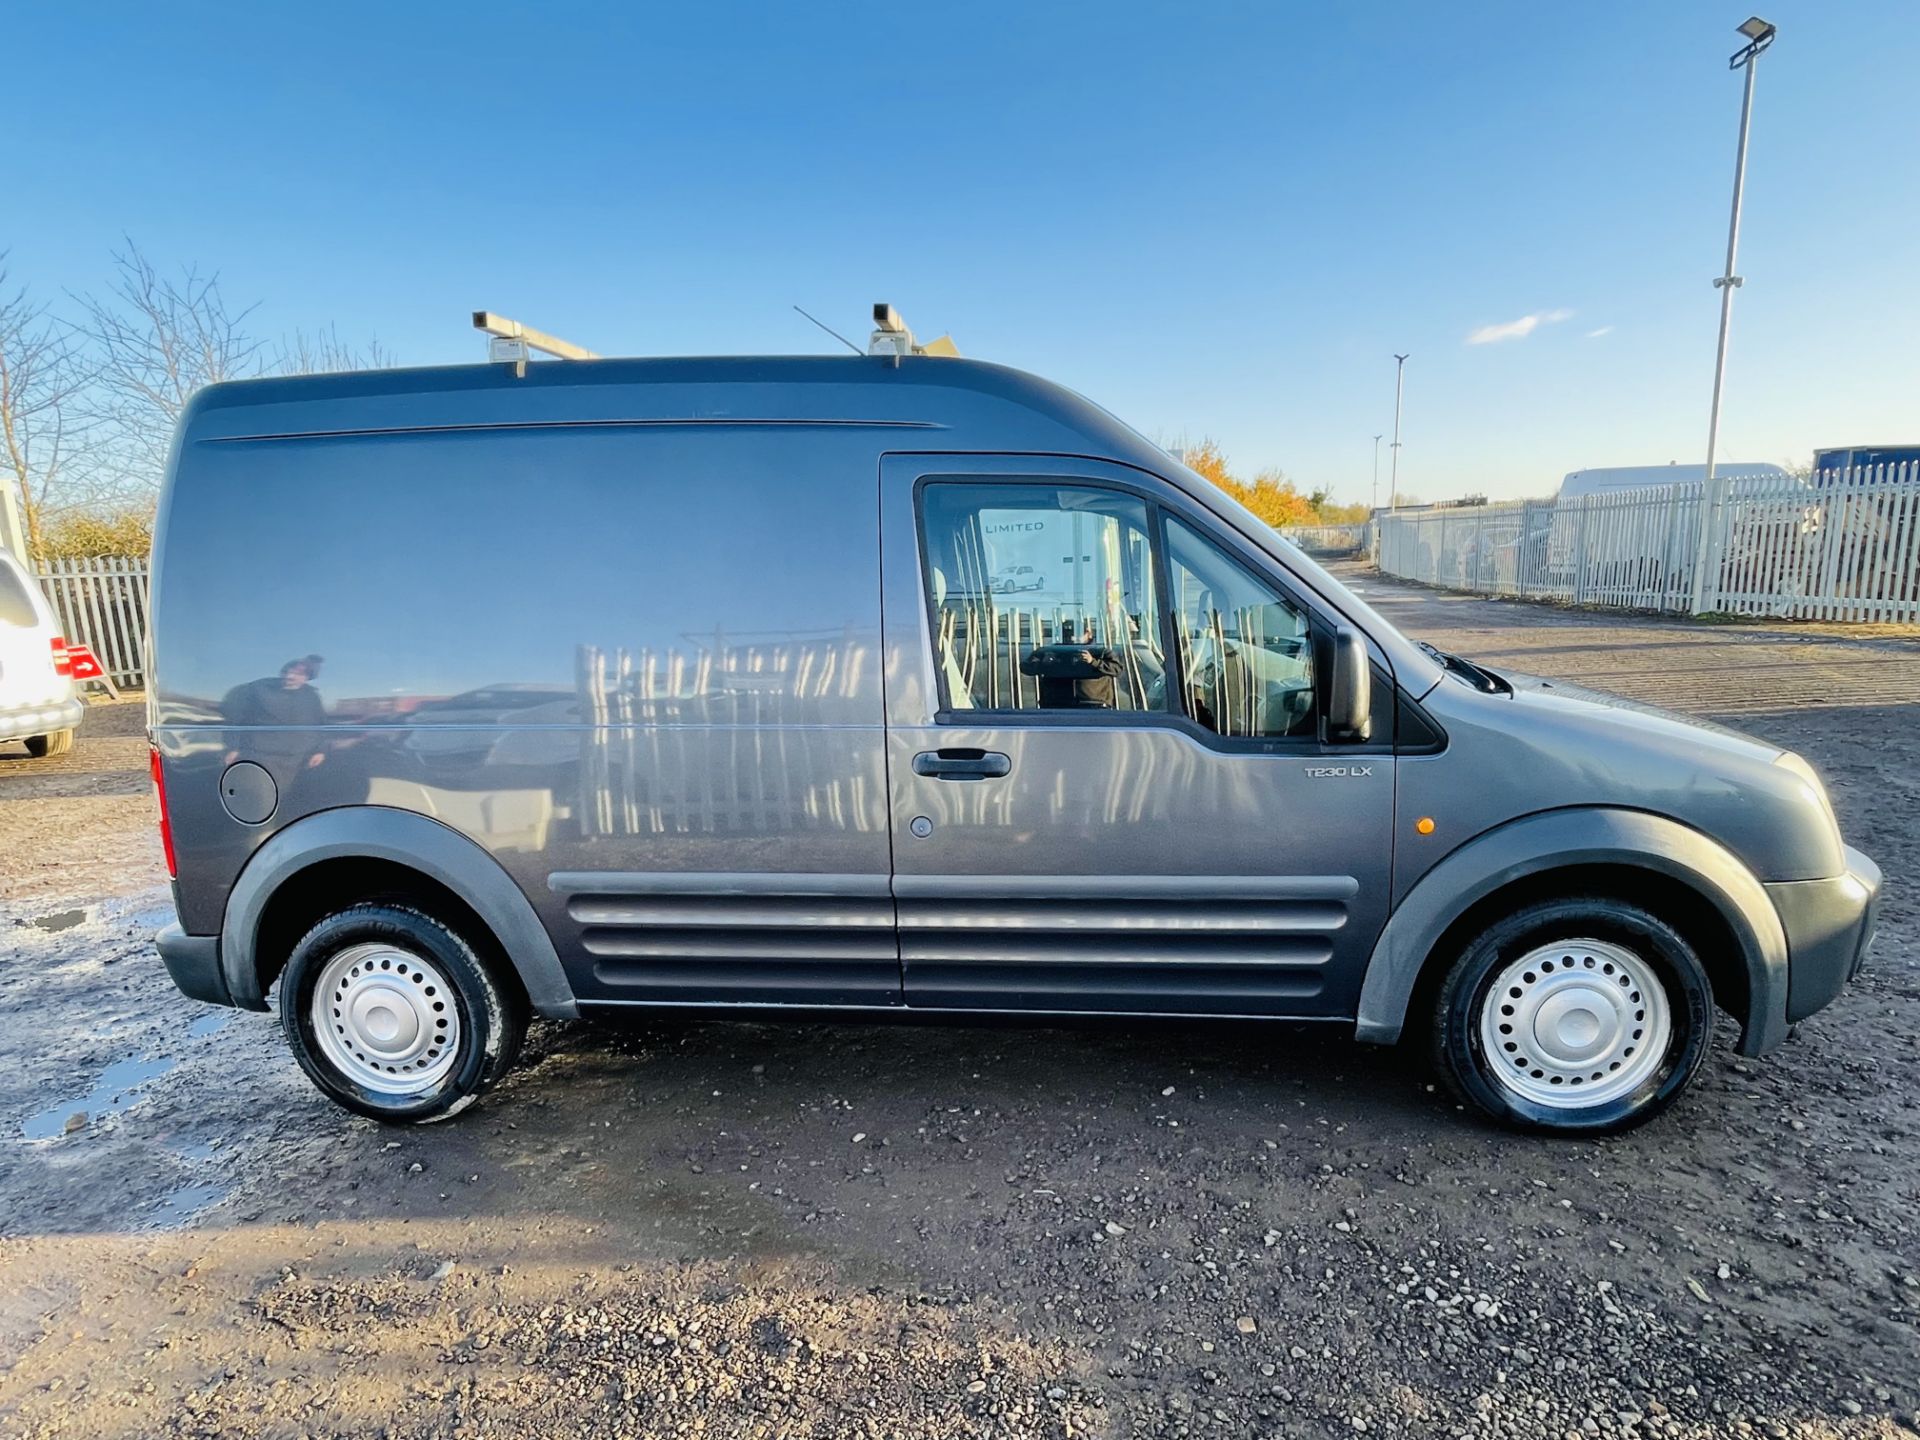 Ford Transit Connect 1.8 TDCI T230 LX110 LWB High Roof 2007 '57 Reg' A/C - No vat save 20% - Image 15 of 20